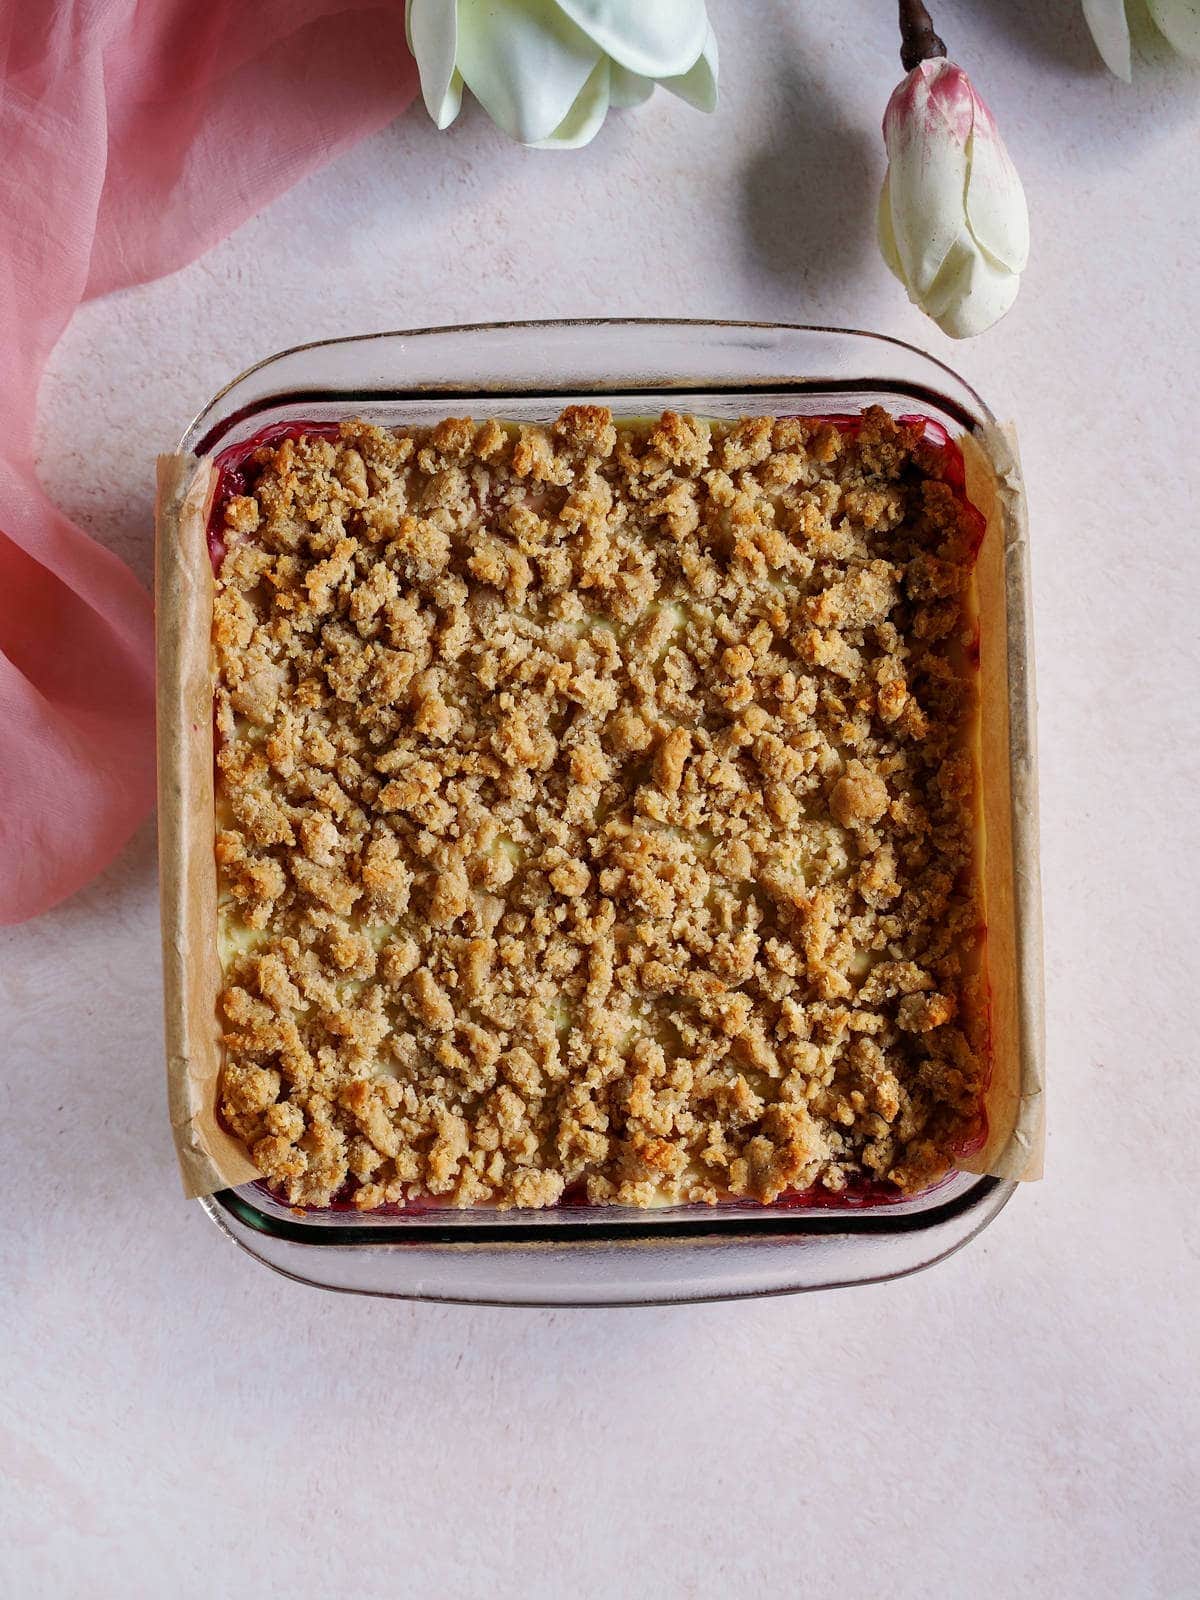 baked crumble cake in glass pan